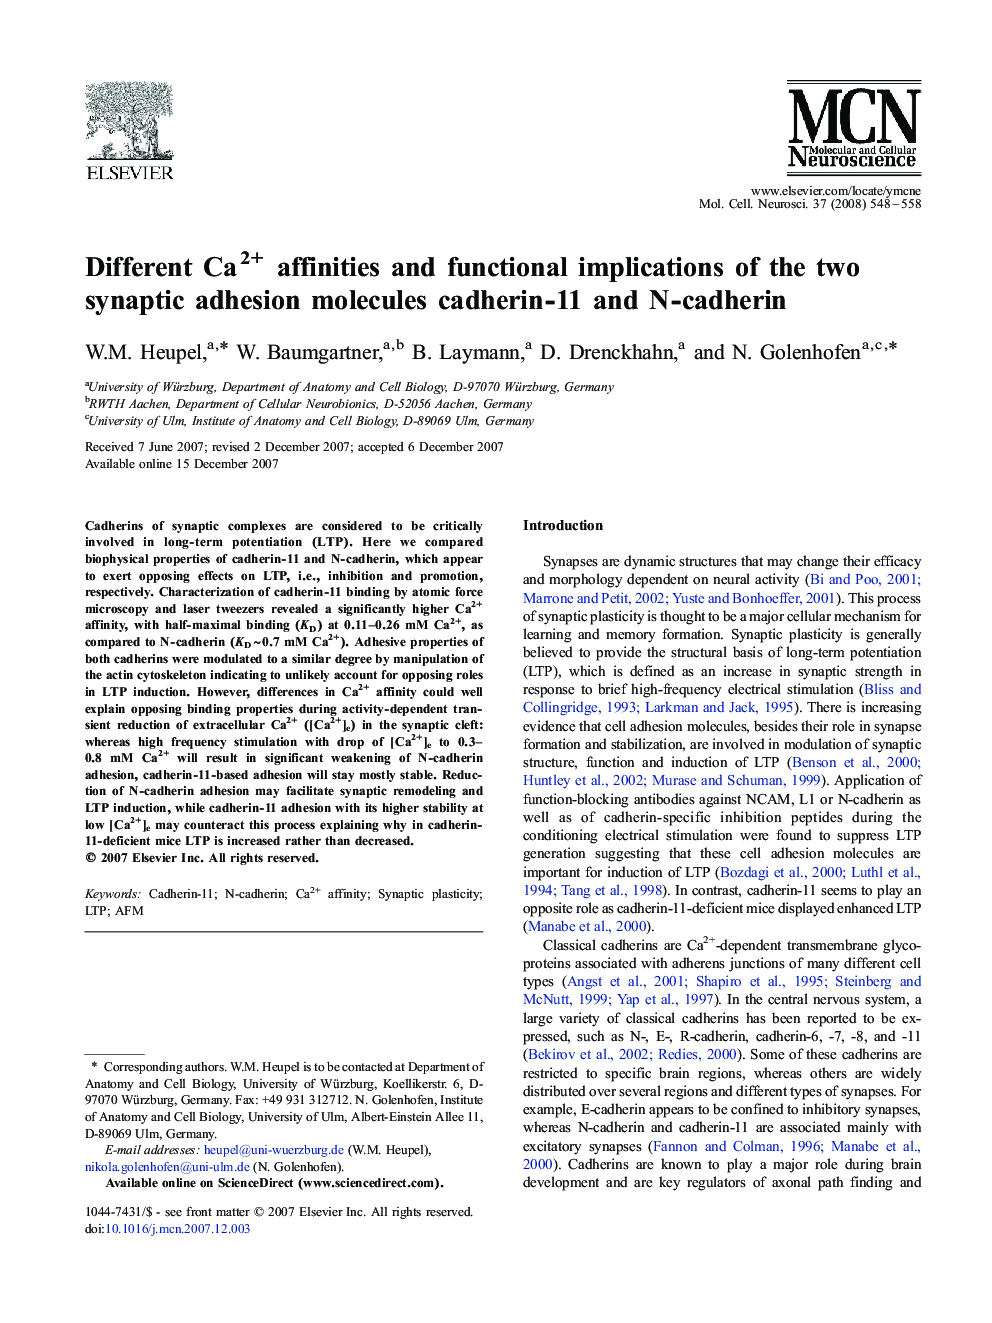 Different Ca2+ affinities and functional implications of the two synaptic adhesion molecules cadherin-11 and N-cadherin